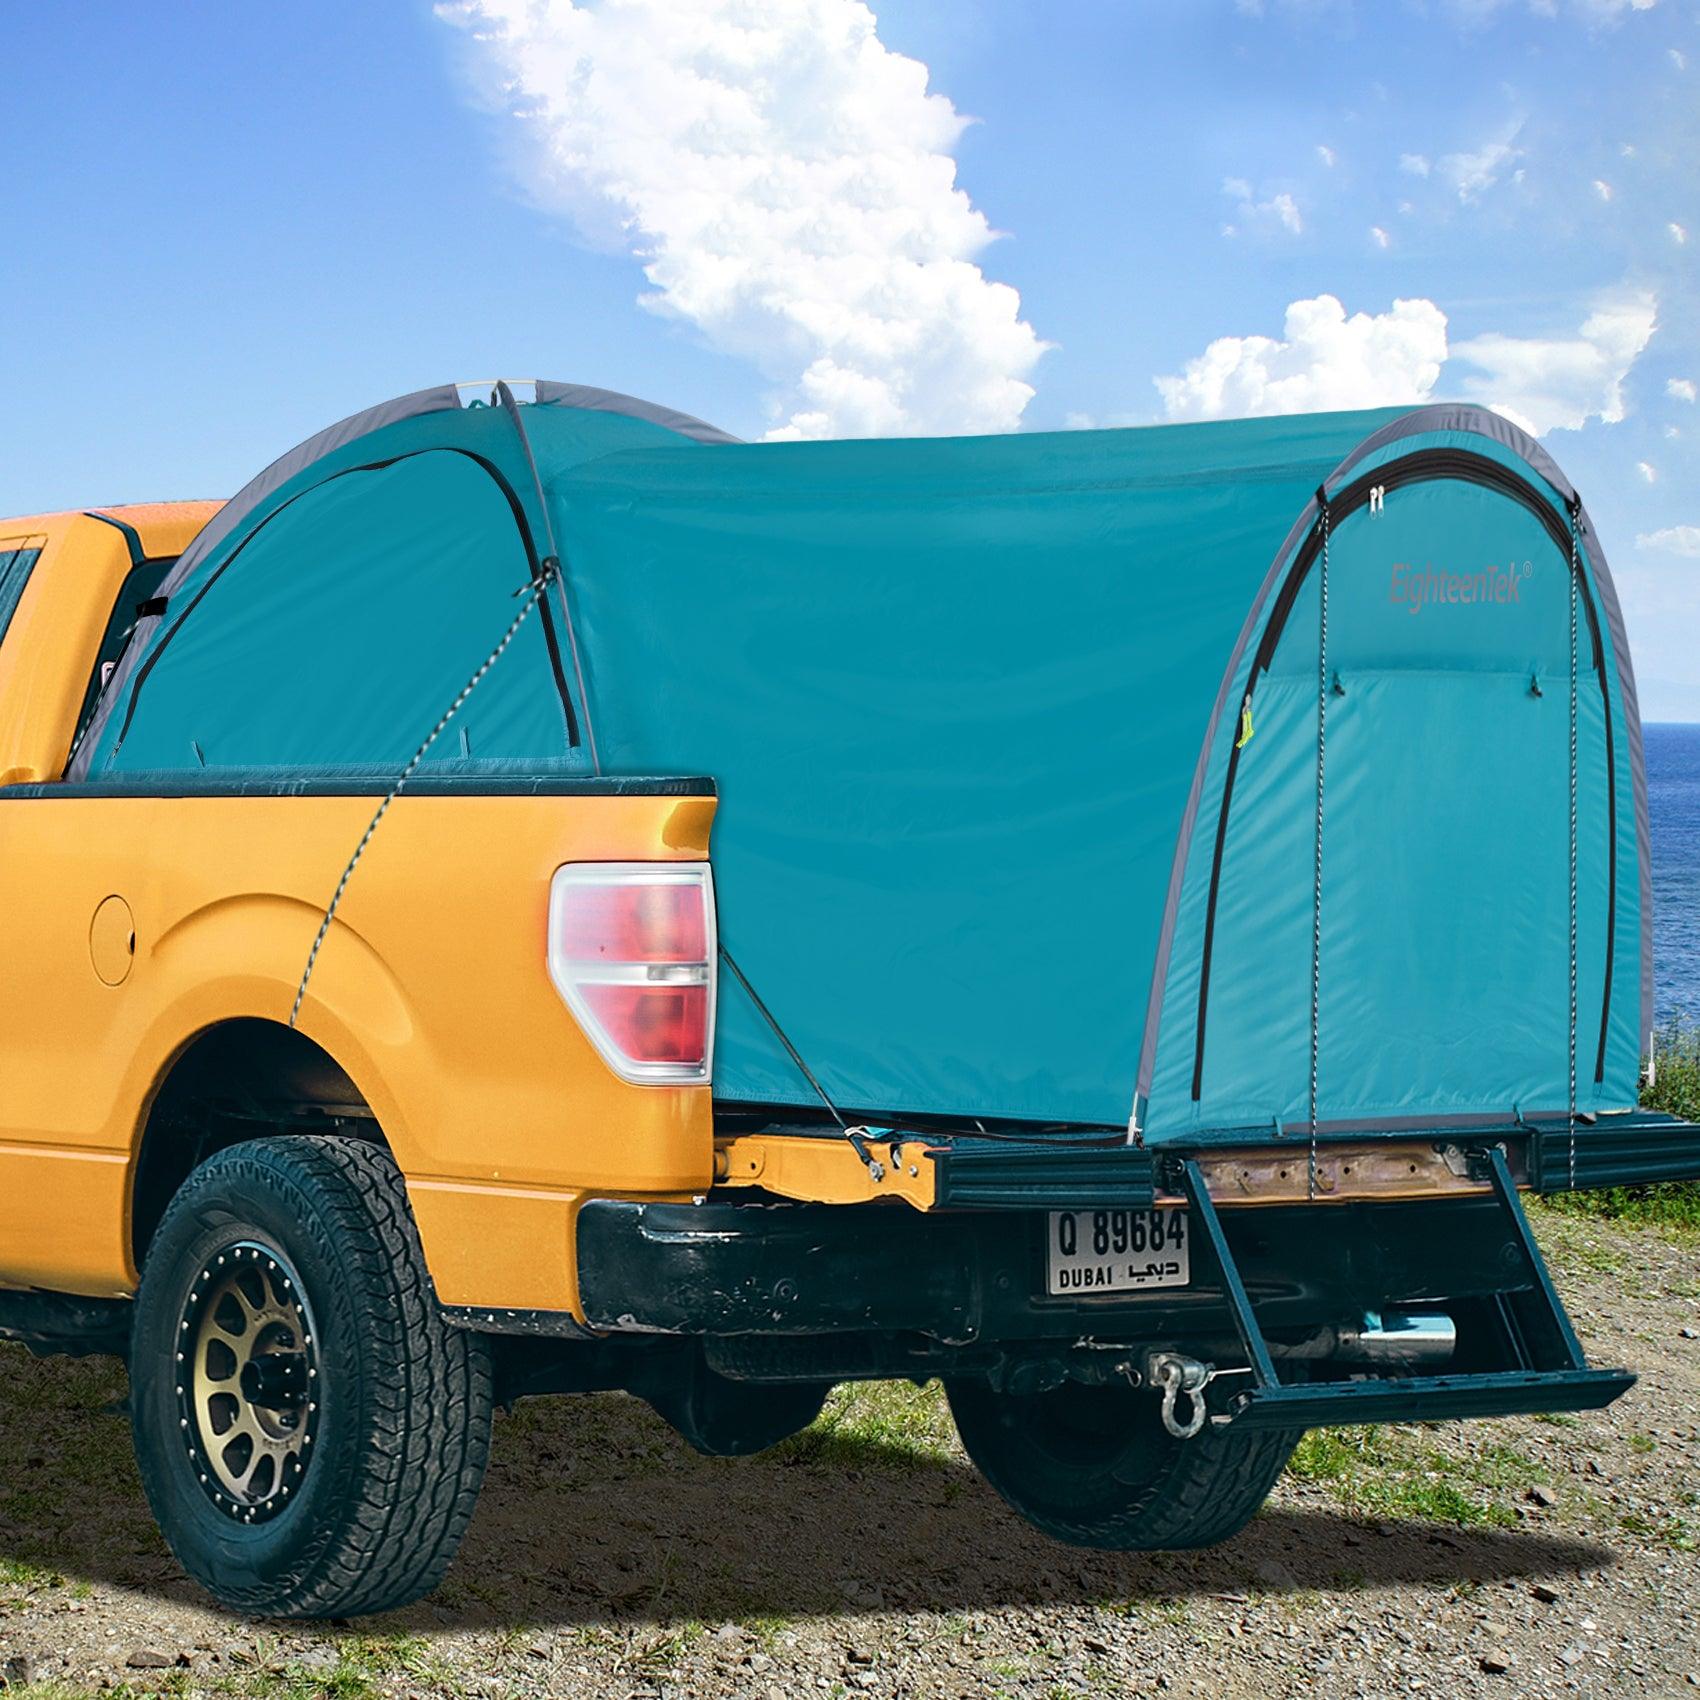 Buy Pop Up Truck Tent Portable Camping Canopy At Low Cost